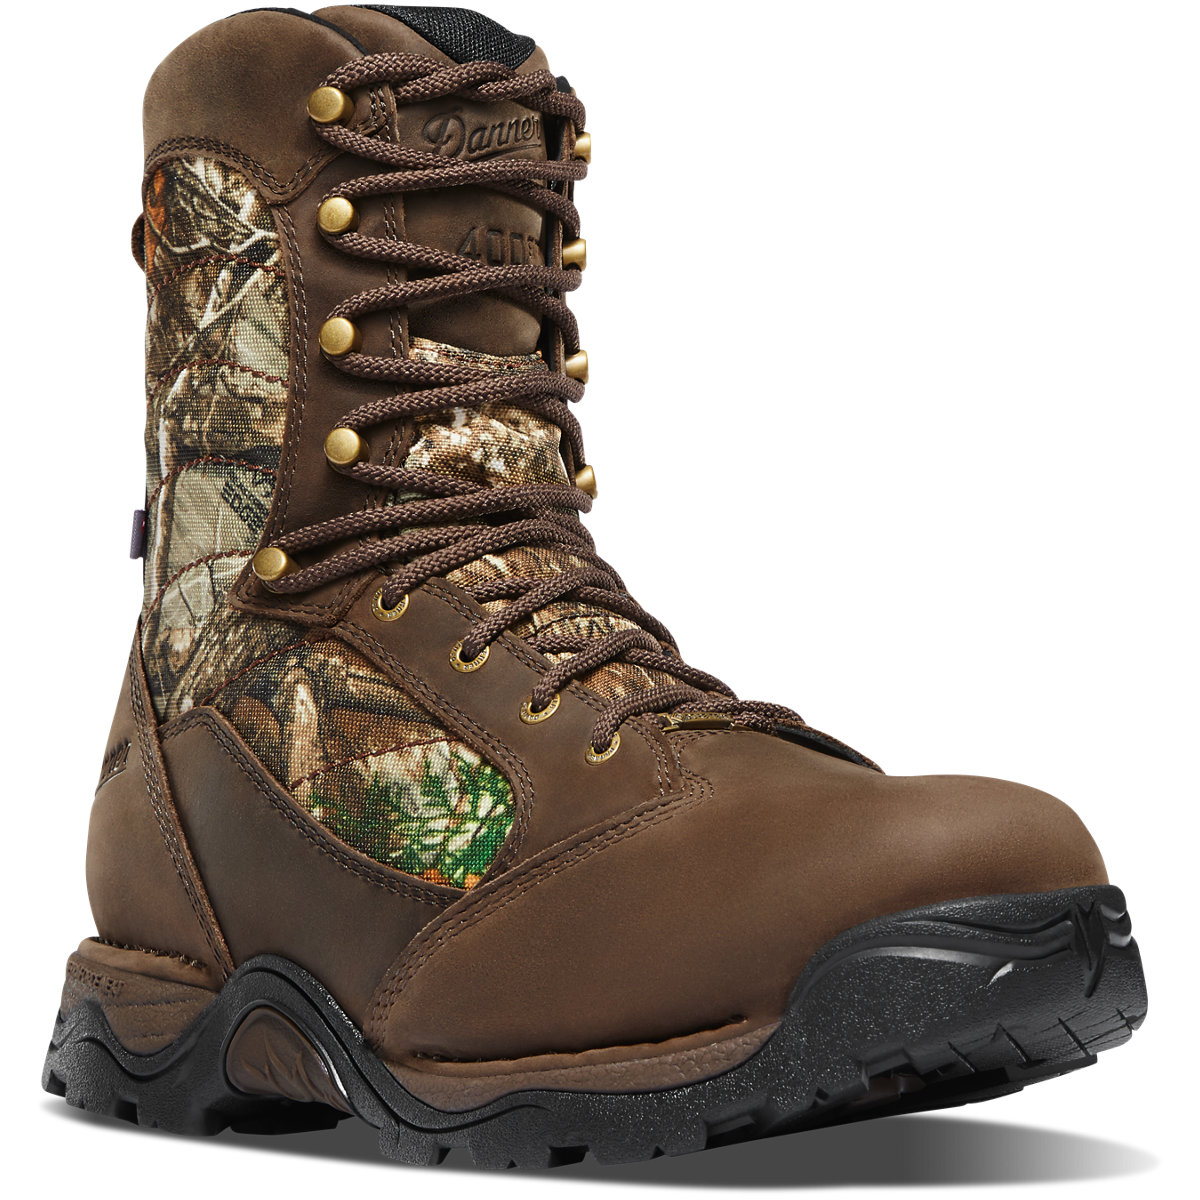 Danner - Pronghorn Realtree Edge Insulated 1200G